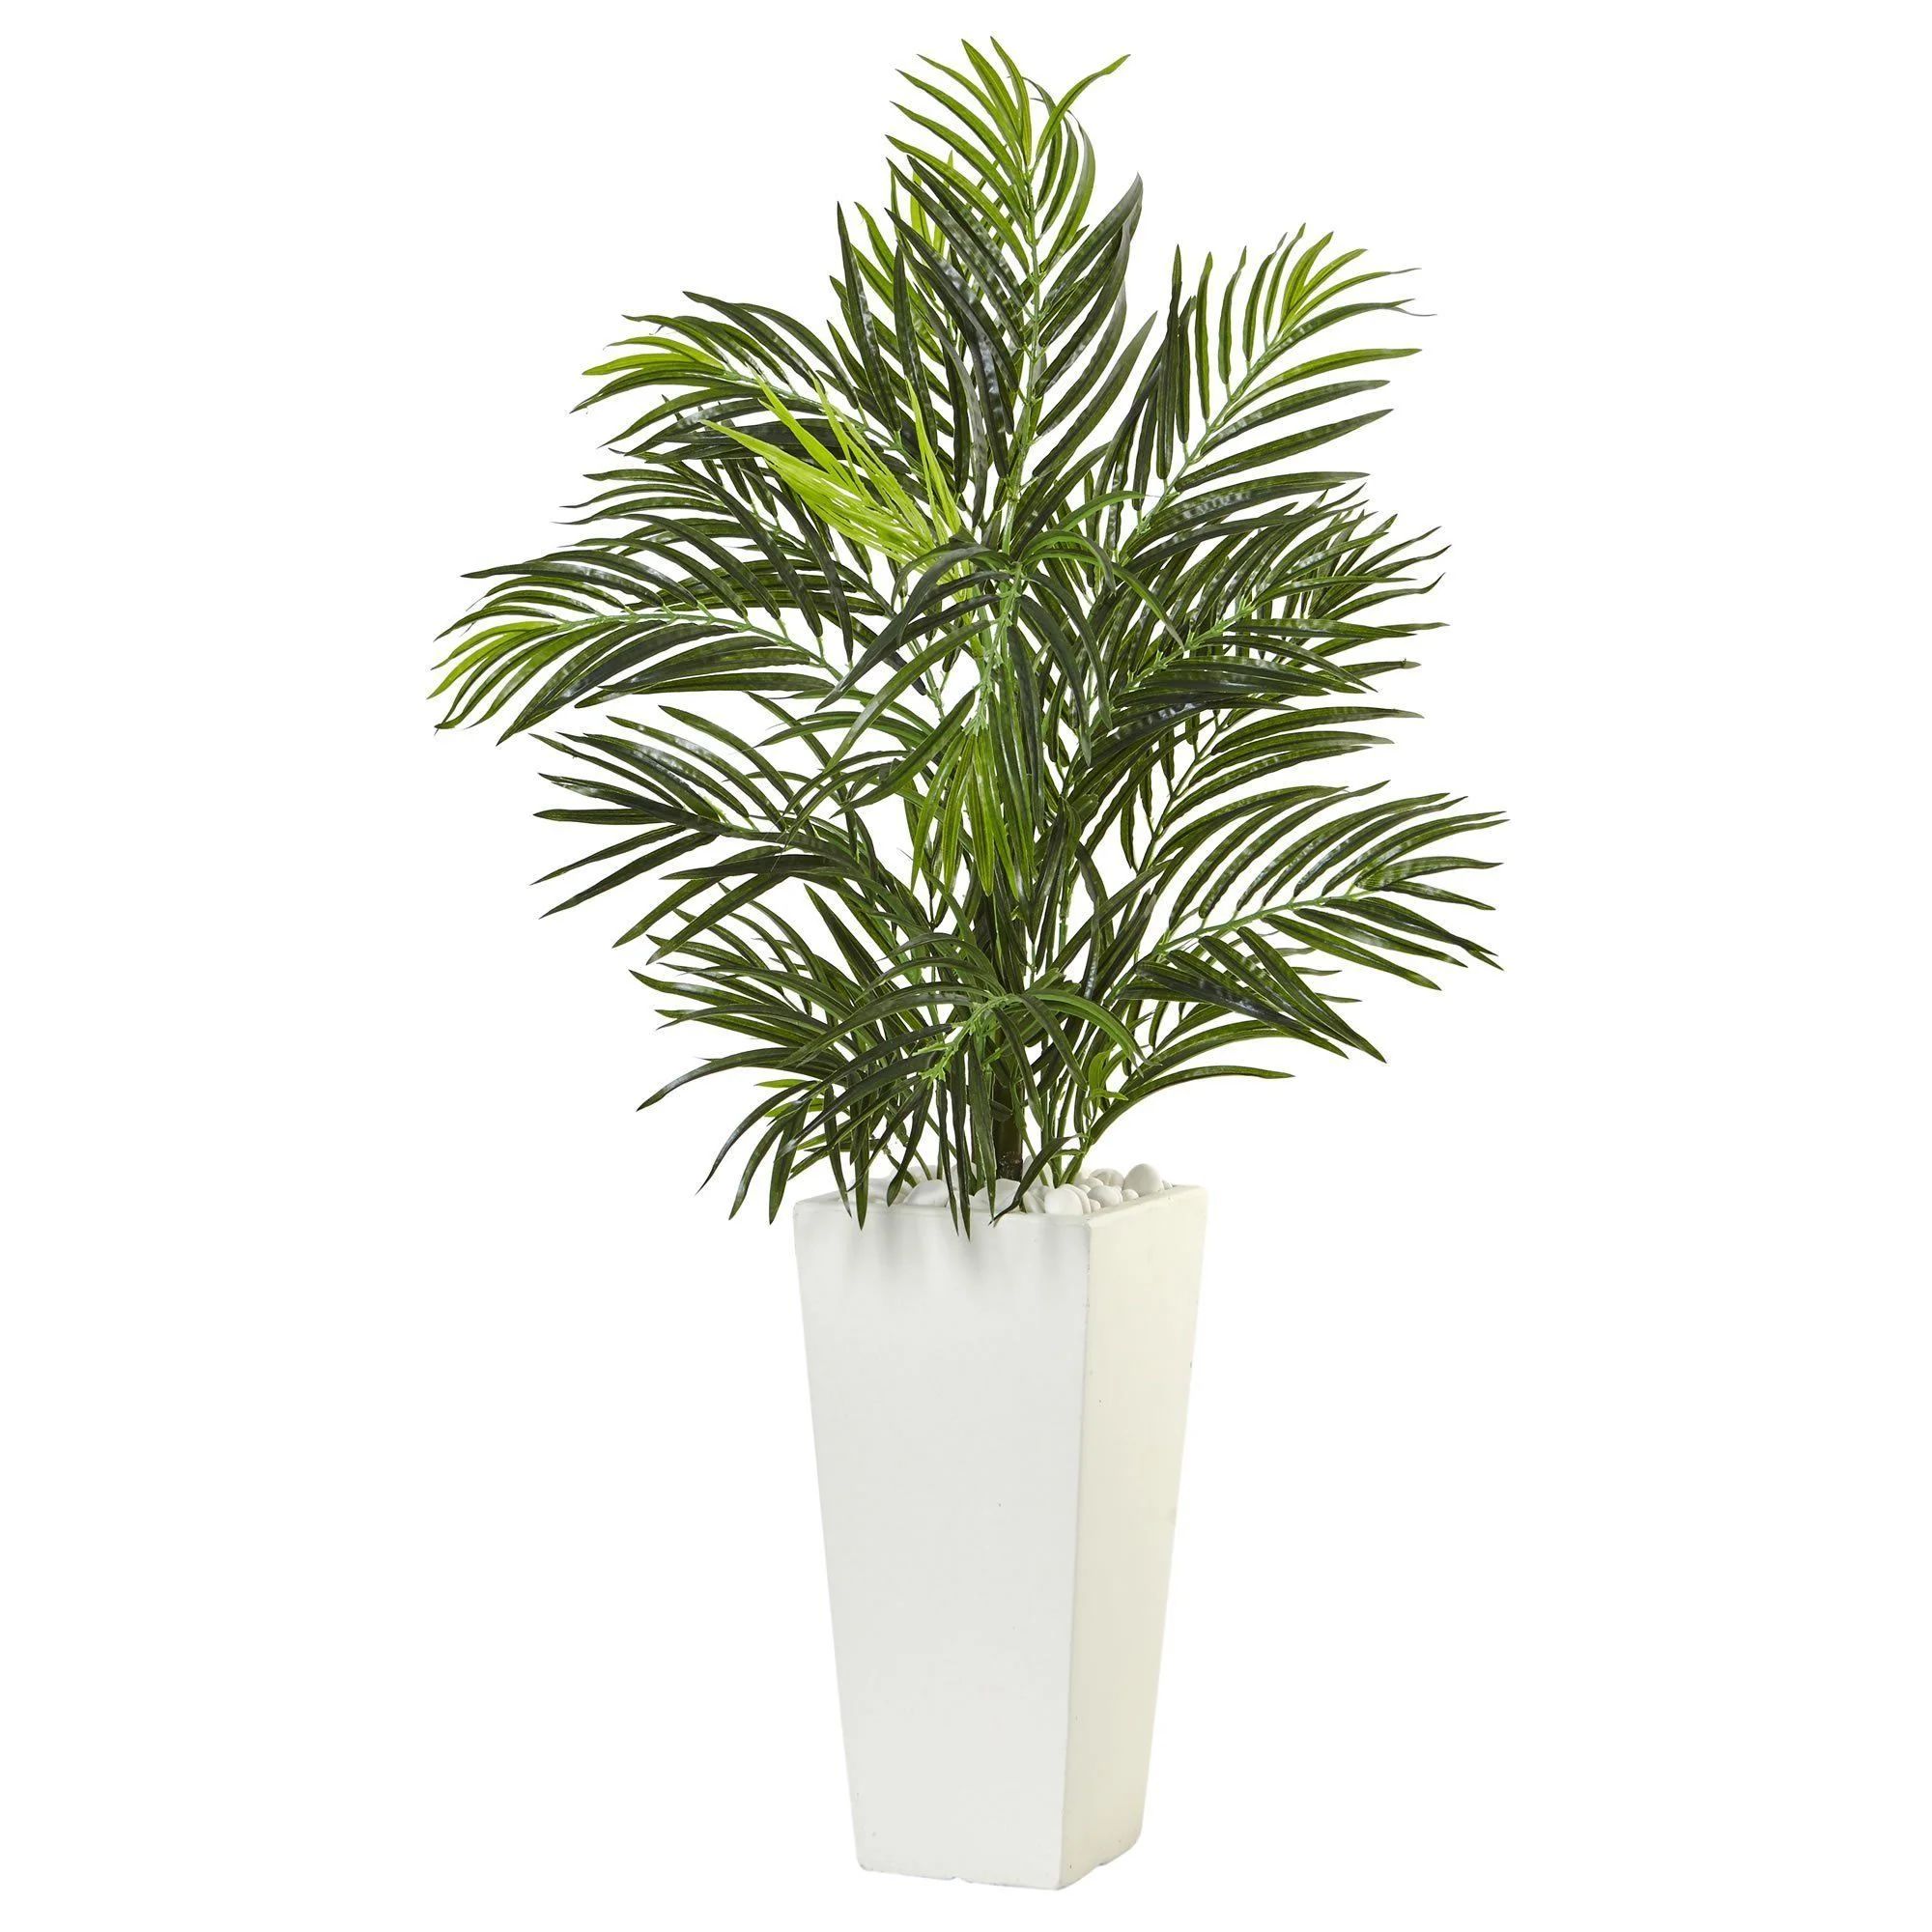 Areca Palm in White Square Planter | Nearly Natural | Nearly Natural